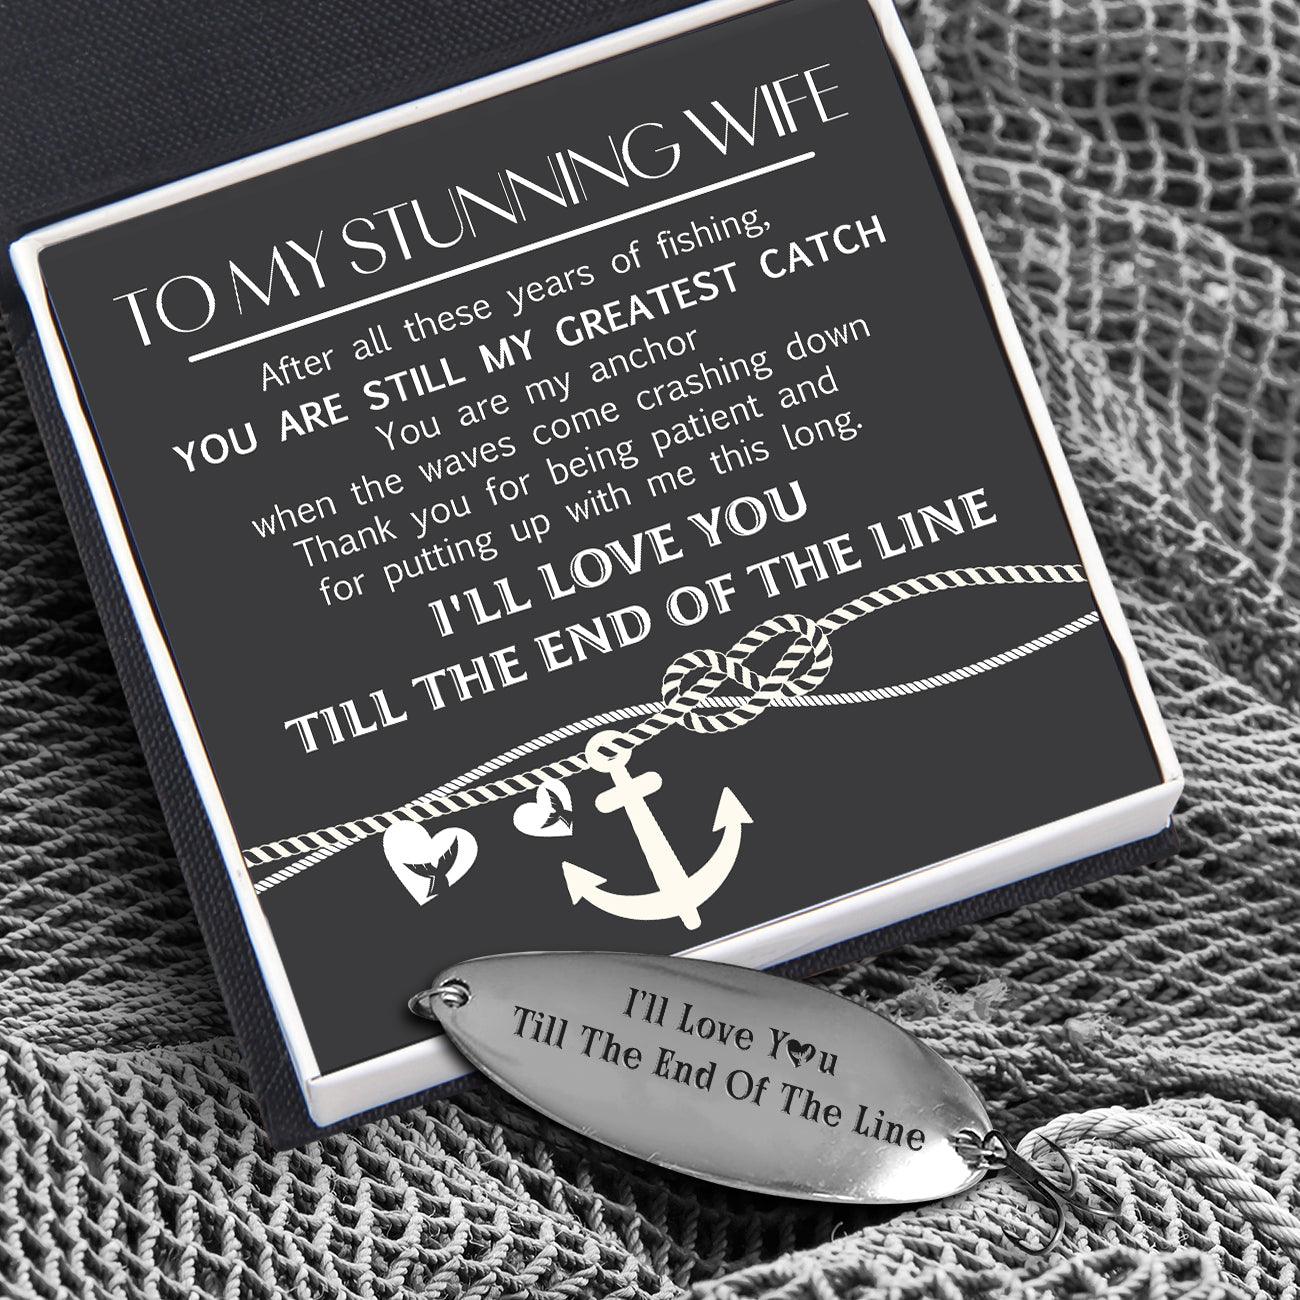 Fishing Lure - Fishing - To My Wife - I'll Love You Till The End Of The Line - Augfb15001 - Gifts Holder